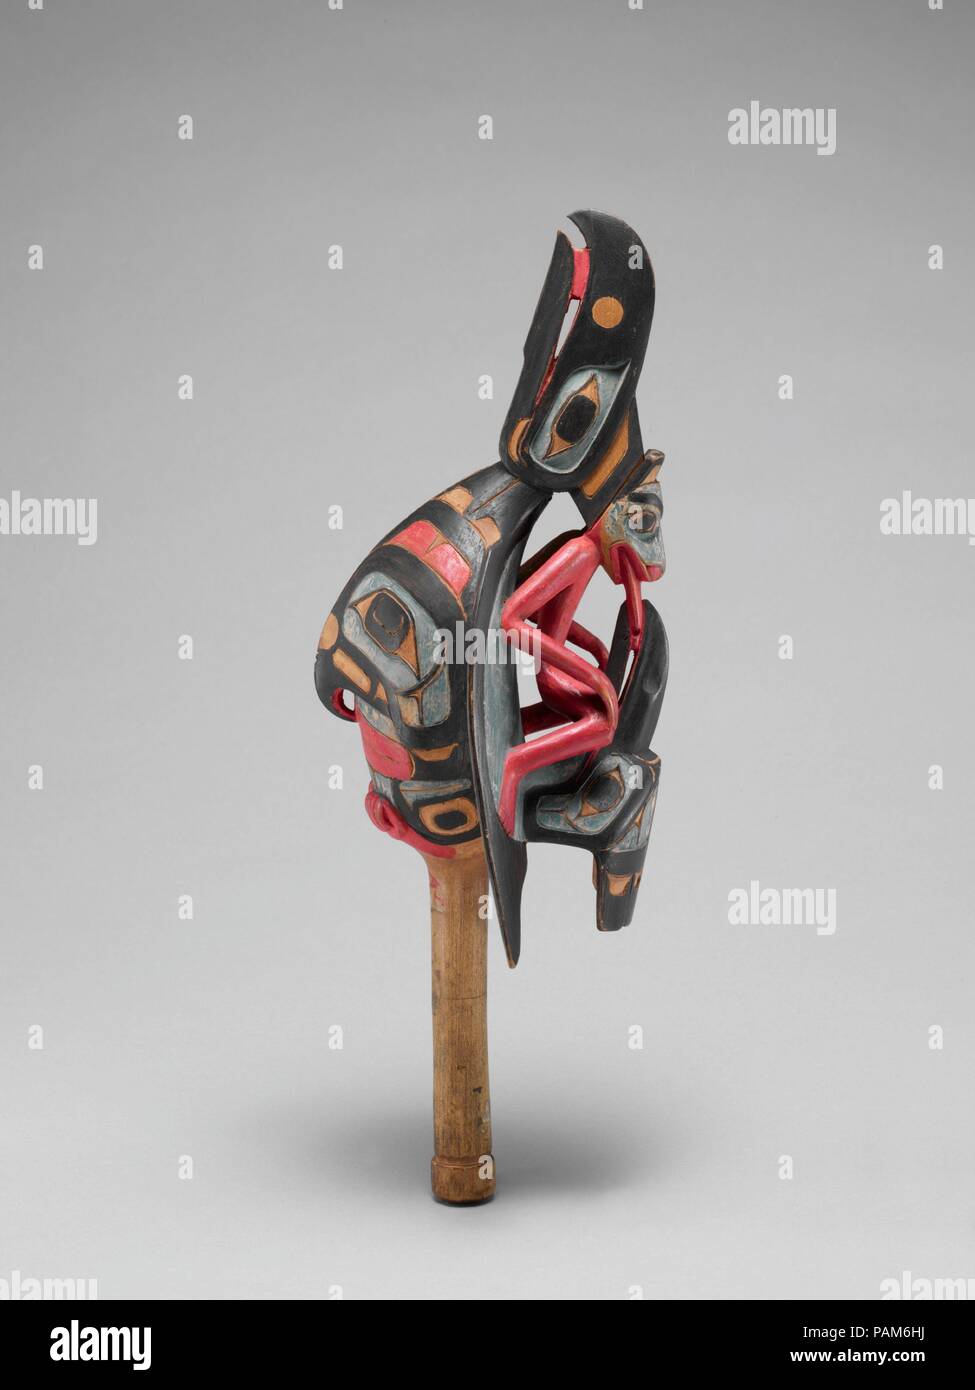 Raven rattle. Culture: Native American (Tsimshian). Dimensions: 12 3/16 × 4 1/16 × 4 1/8 in. (31 × 10.3 × 10.5 cm). Date: 19th century.  Most often associated with shamanic practices on the Northwest Coast, raven rattles are held oriented with the bird's beak pointing down when used in dance. Additionally, rattles like this are used to channel a shaman's spirit guide and can be used in healing ceremonies. Much of the symbolism associated with this rattle comments on the transmission of power from one figure to the next--the raven to humankind in general (as oral tradition states) and the kingf Stock Photo